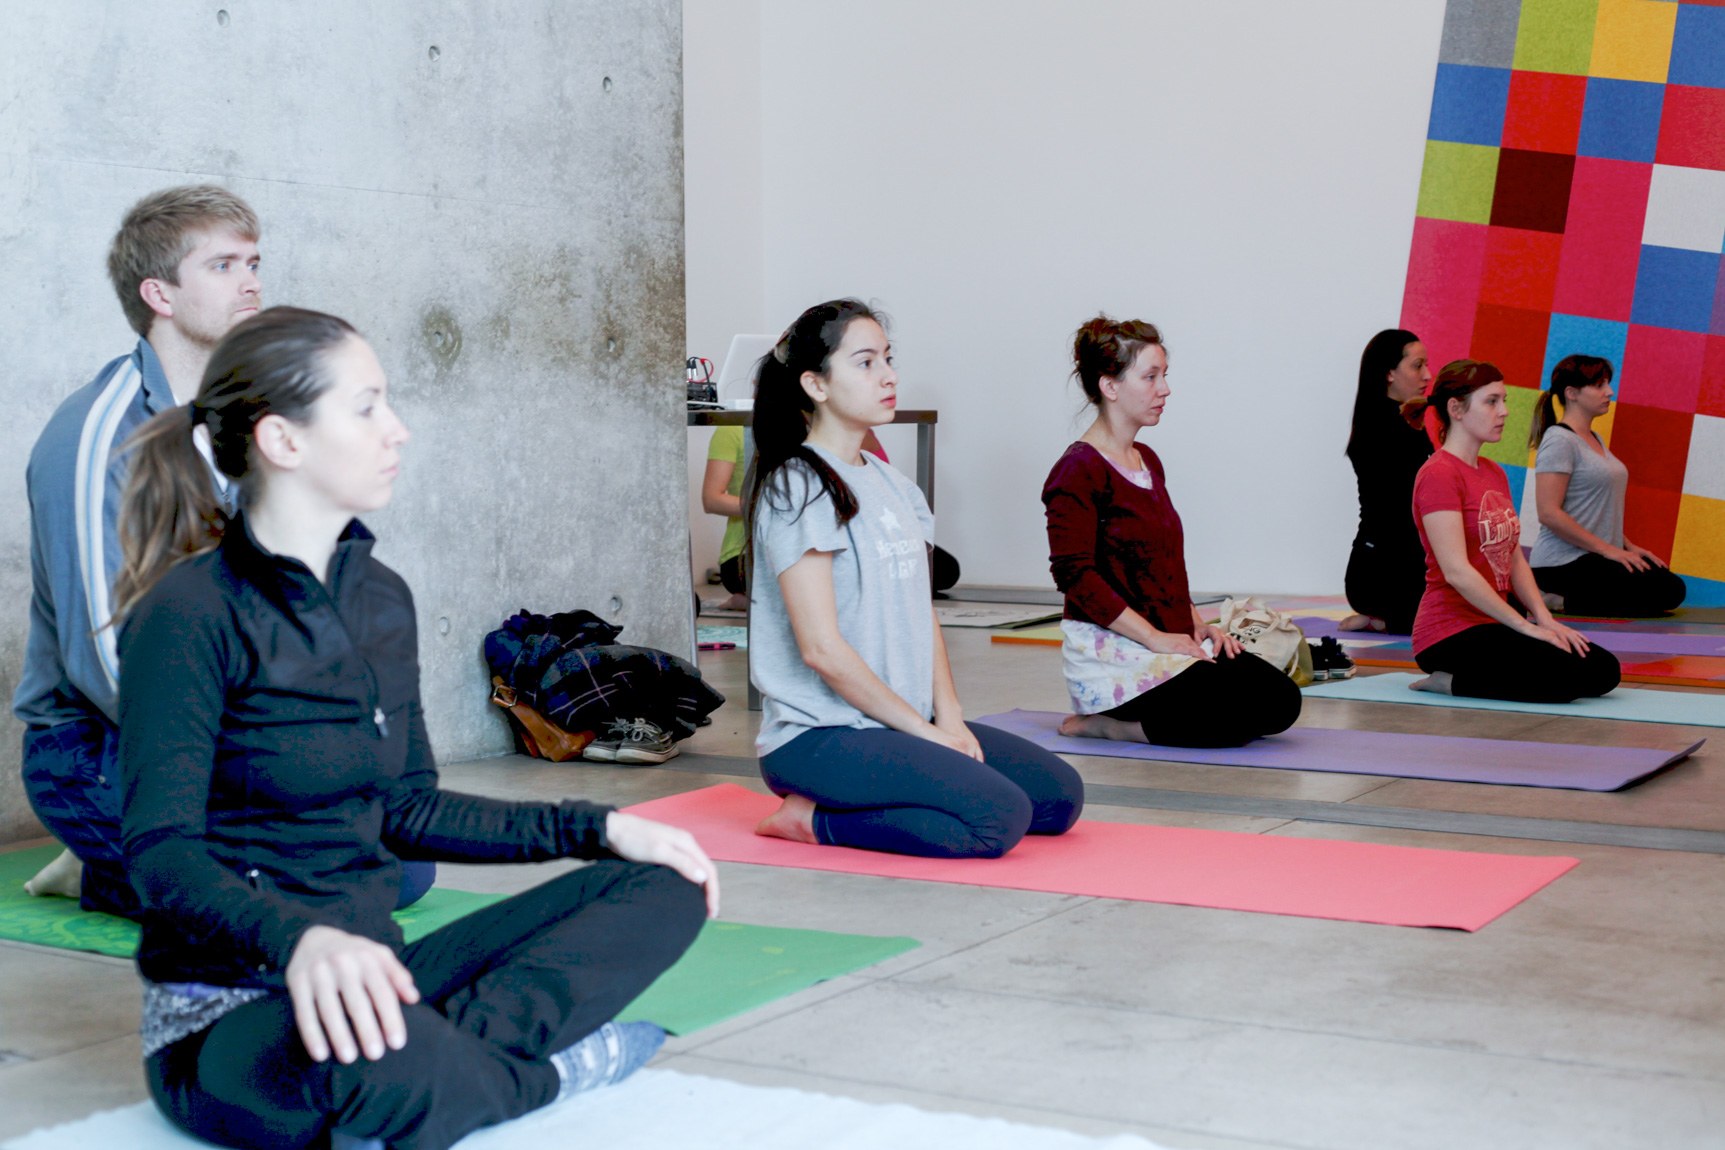 Yoga participants sit on yoga mats in the Main Gallery facing the instructor.